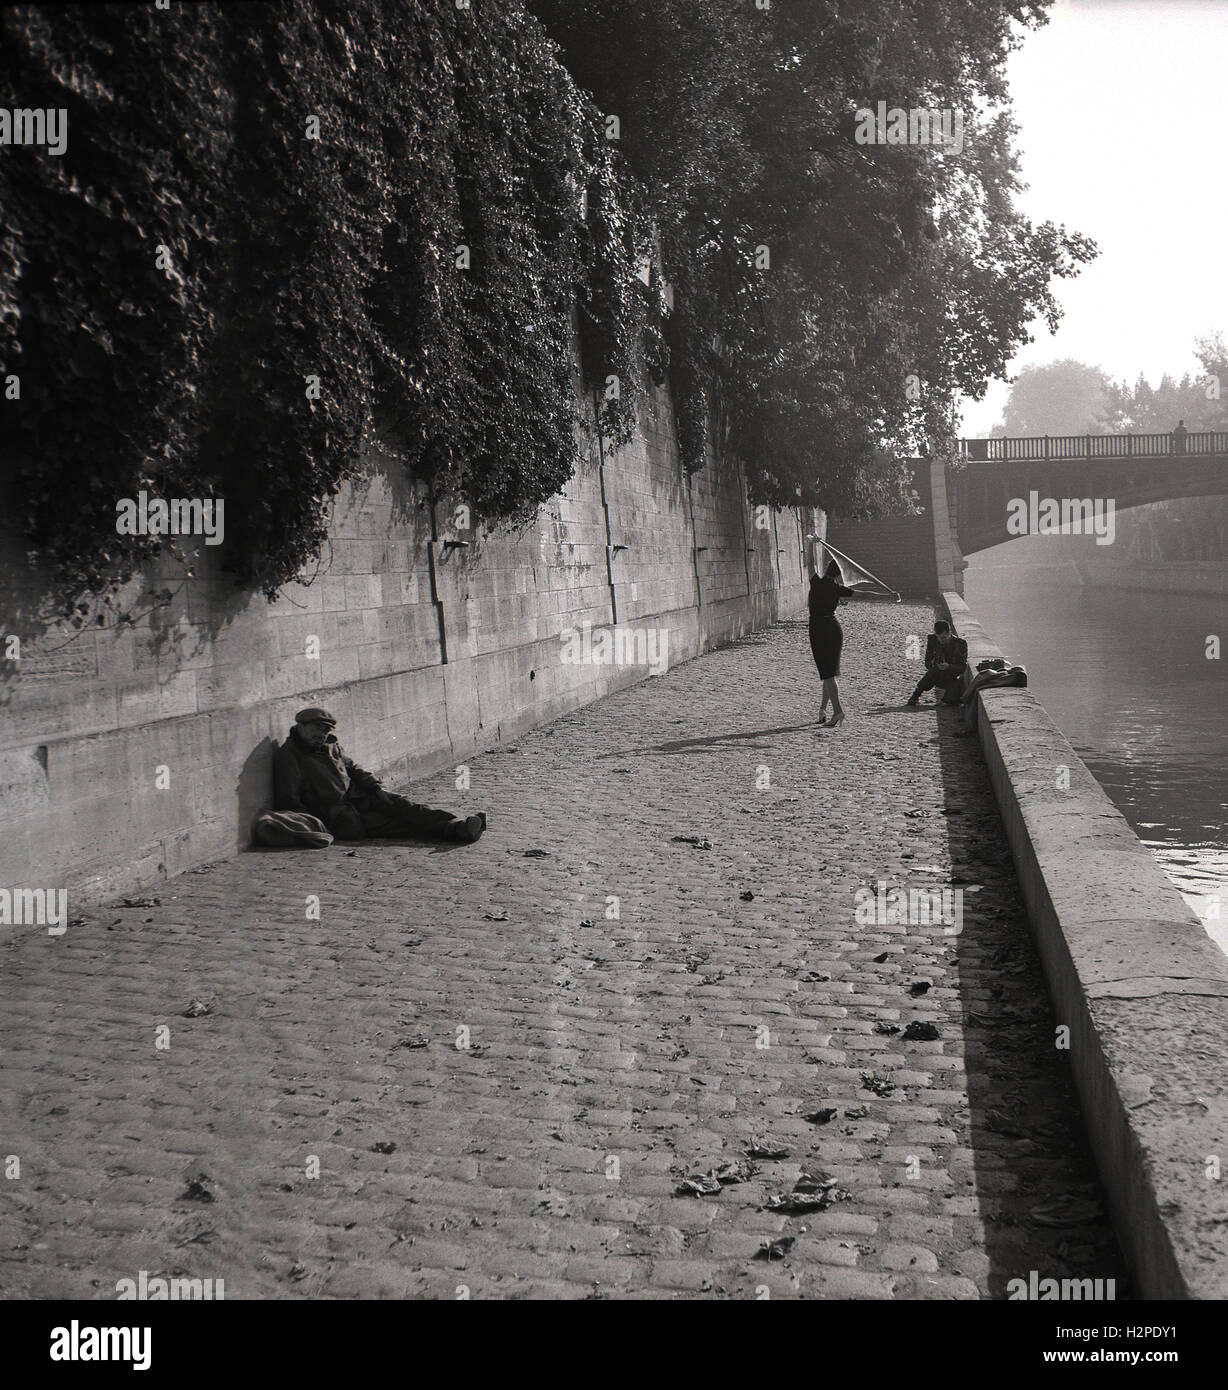 1950s, a fashion shoot on the banks of the River Seine, Paris, France, photographer taking pictures of a female in heels and dress, with a vagrant sitting on the cobblestone against a wall. Stock Photo